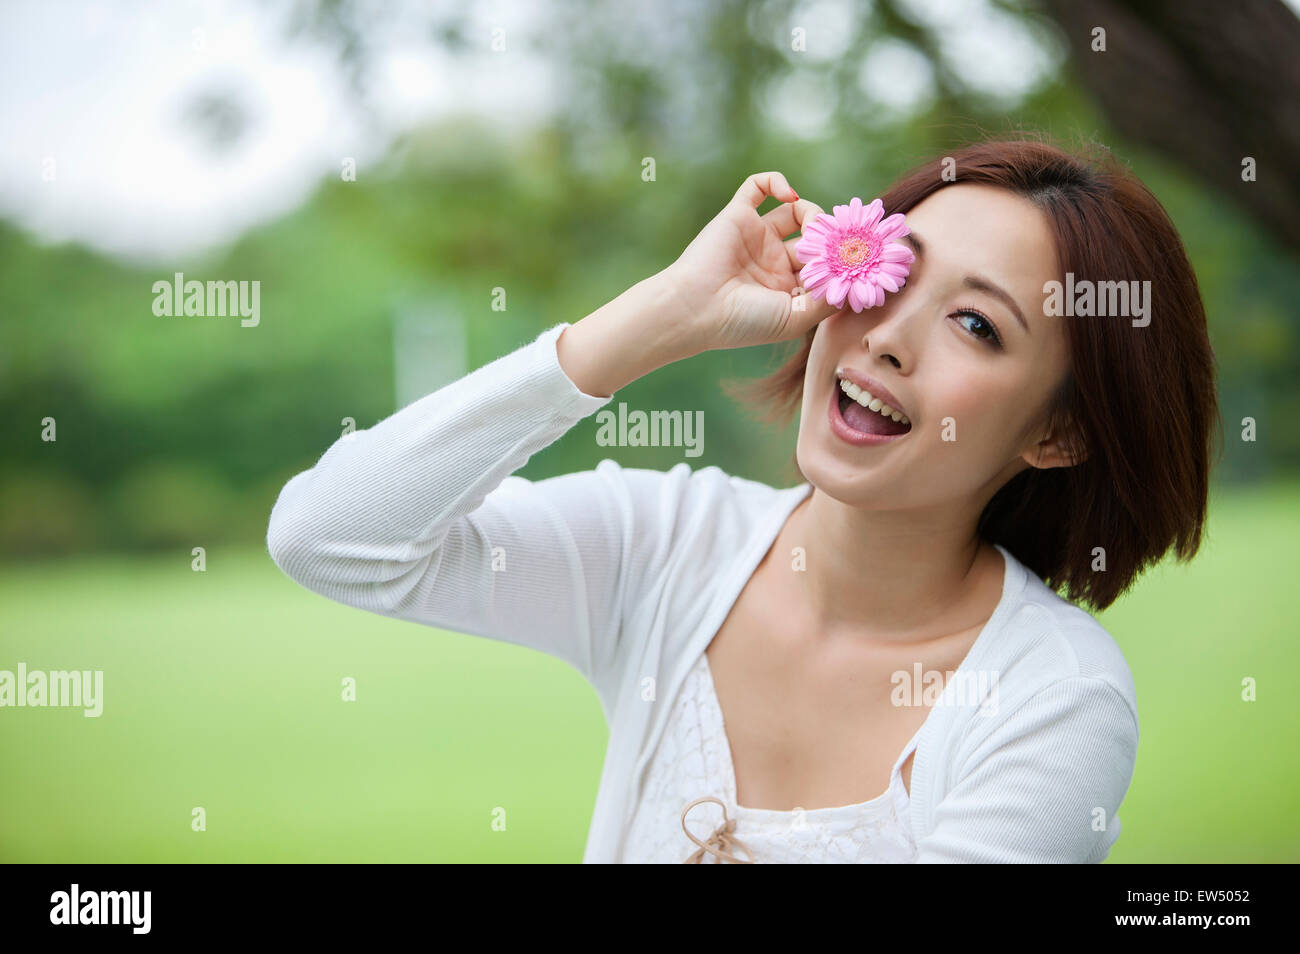 Young woman smiling at the camera with one flower Stock Photo